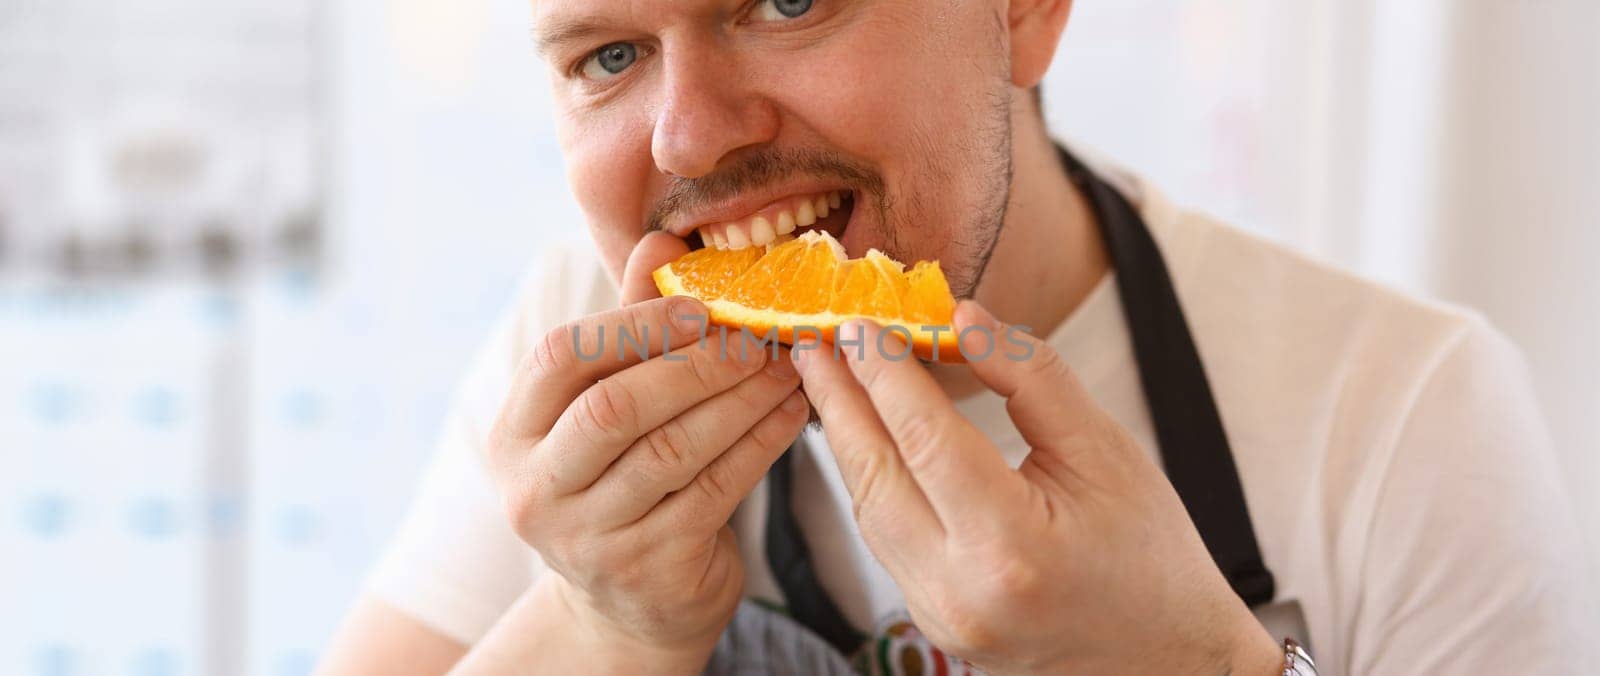 Man Chef Eating Juice Orange Kitchen Portrait. Blogger Person Bite Slice of Citrus Fruit on White Background. Healthy Lifestyle Concept. Cook Holding Fresh Food in Hands Looking at Camera Shot